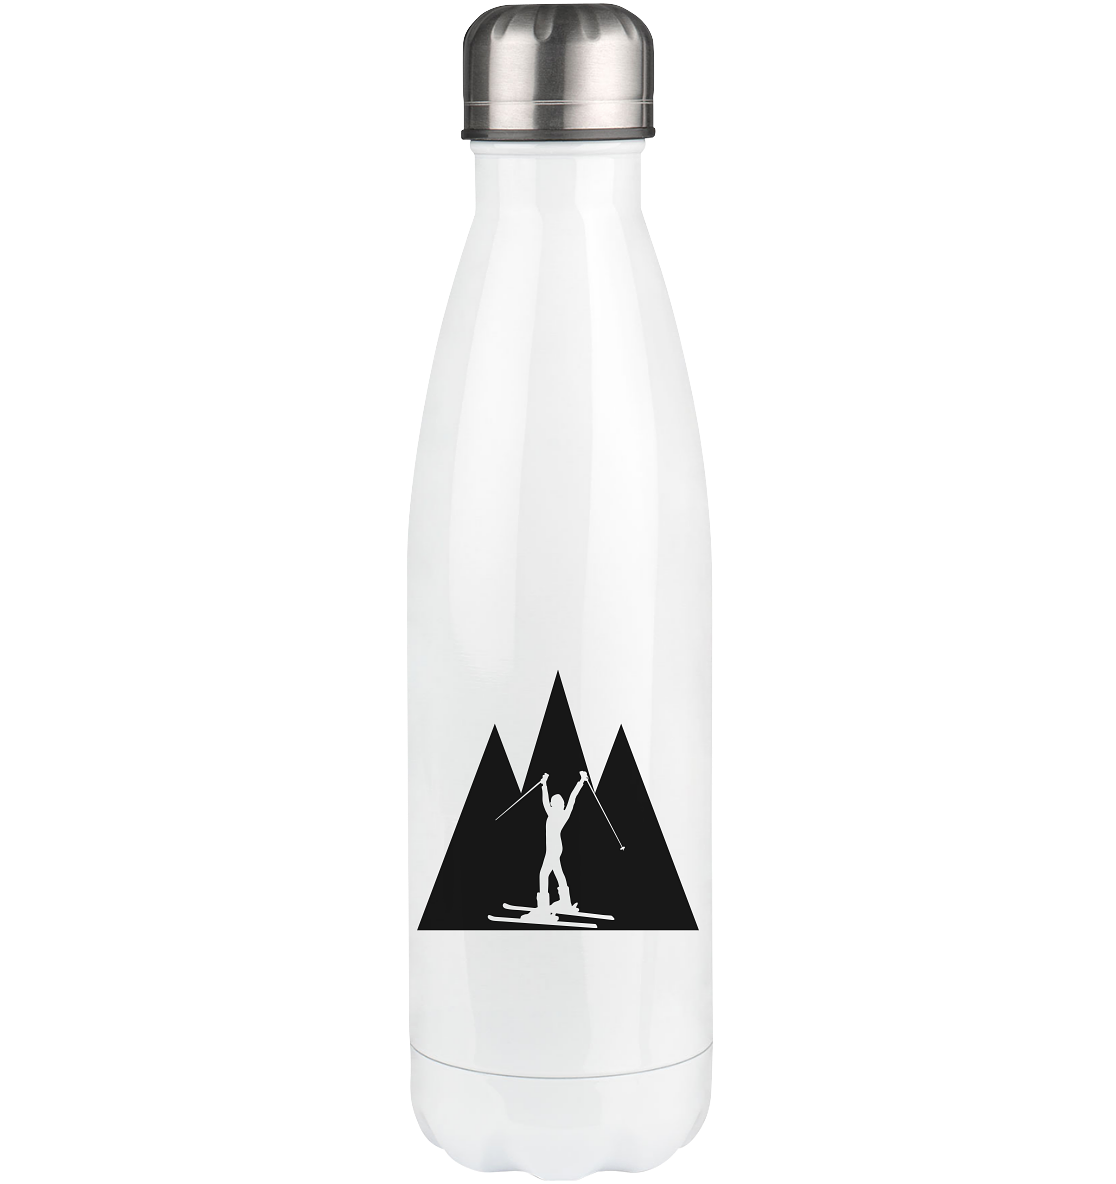 Triangle Mountain and Skiing - Edelstahl Thermosflasche klettern ski 500ml